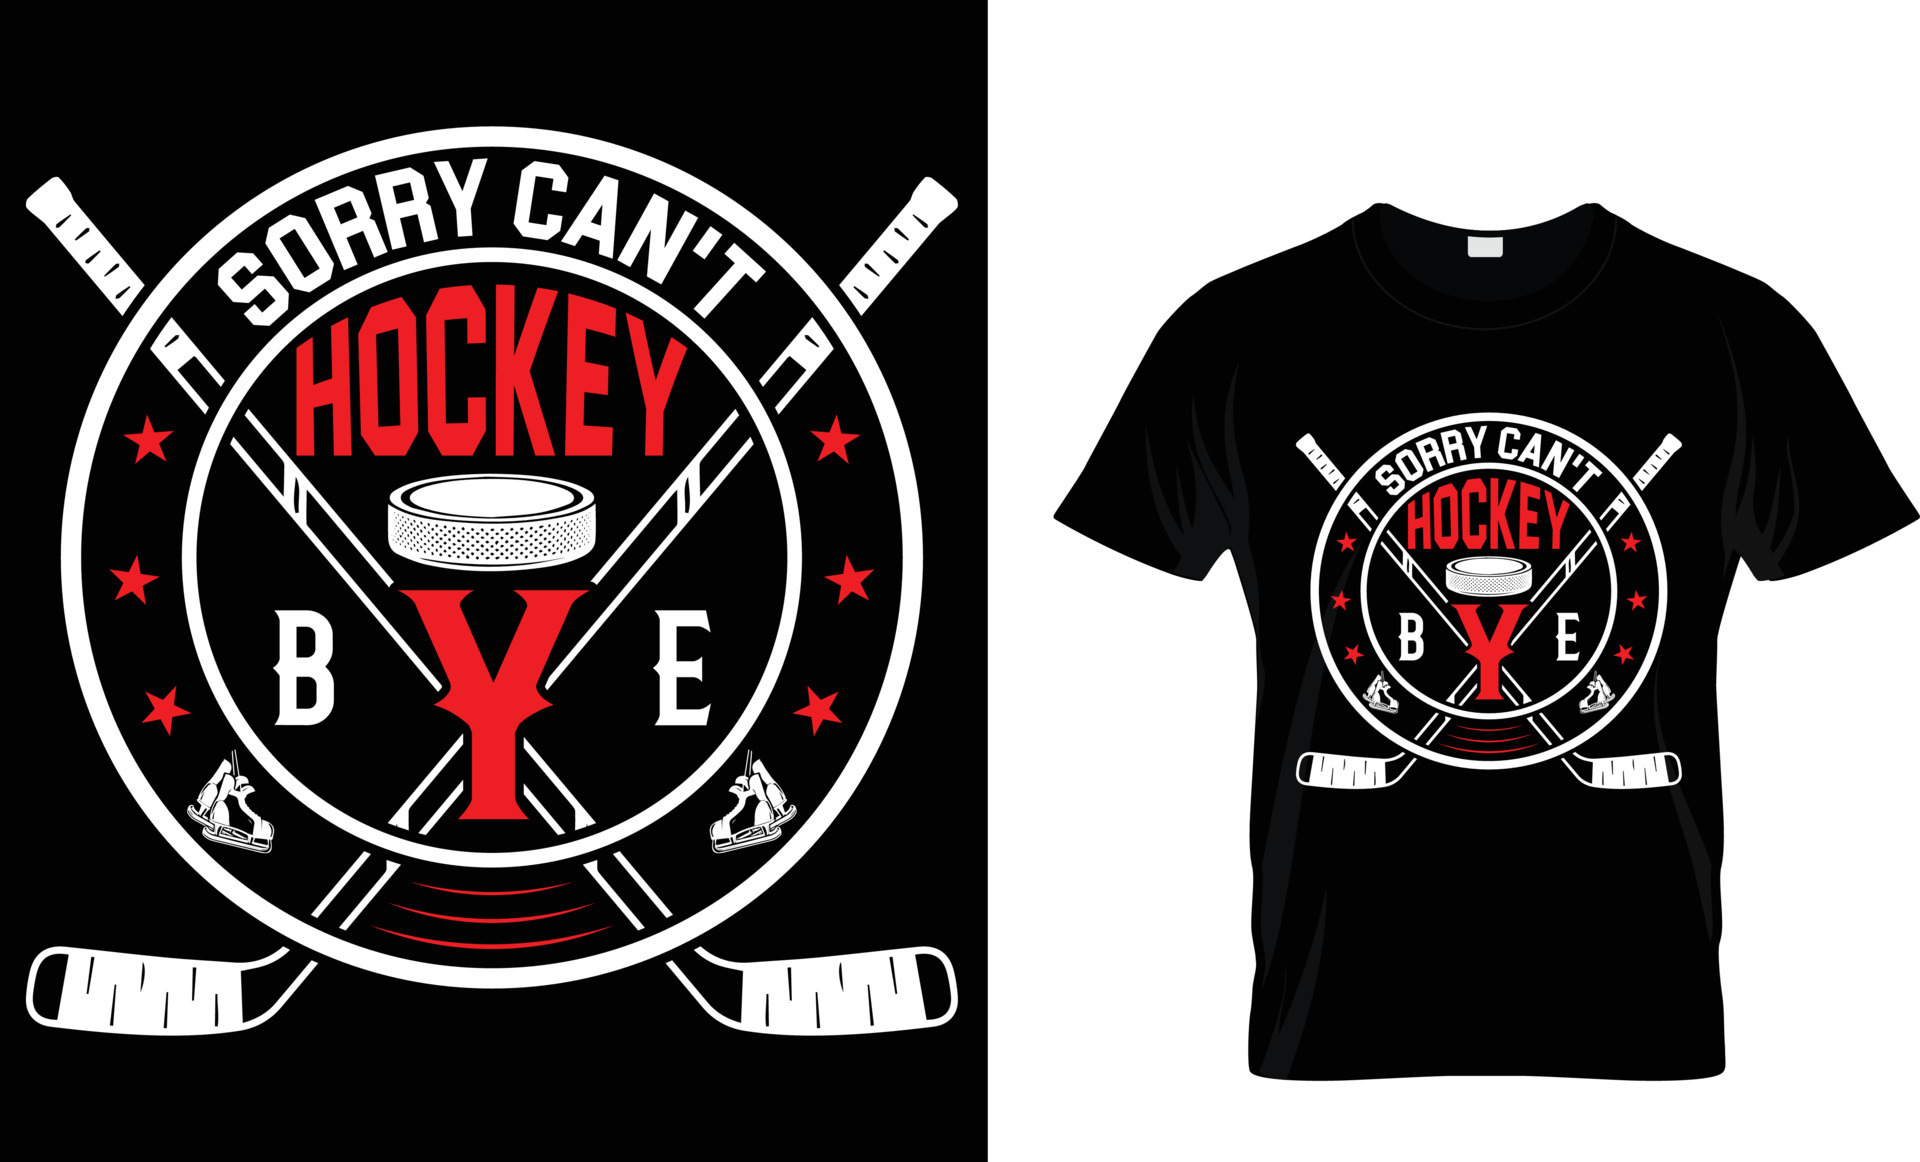 Ice hockey t-shirt design vector graphic. Sorry can't hockey bye ...